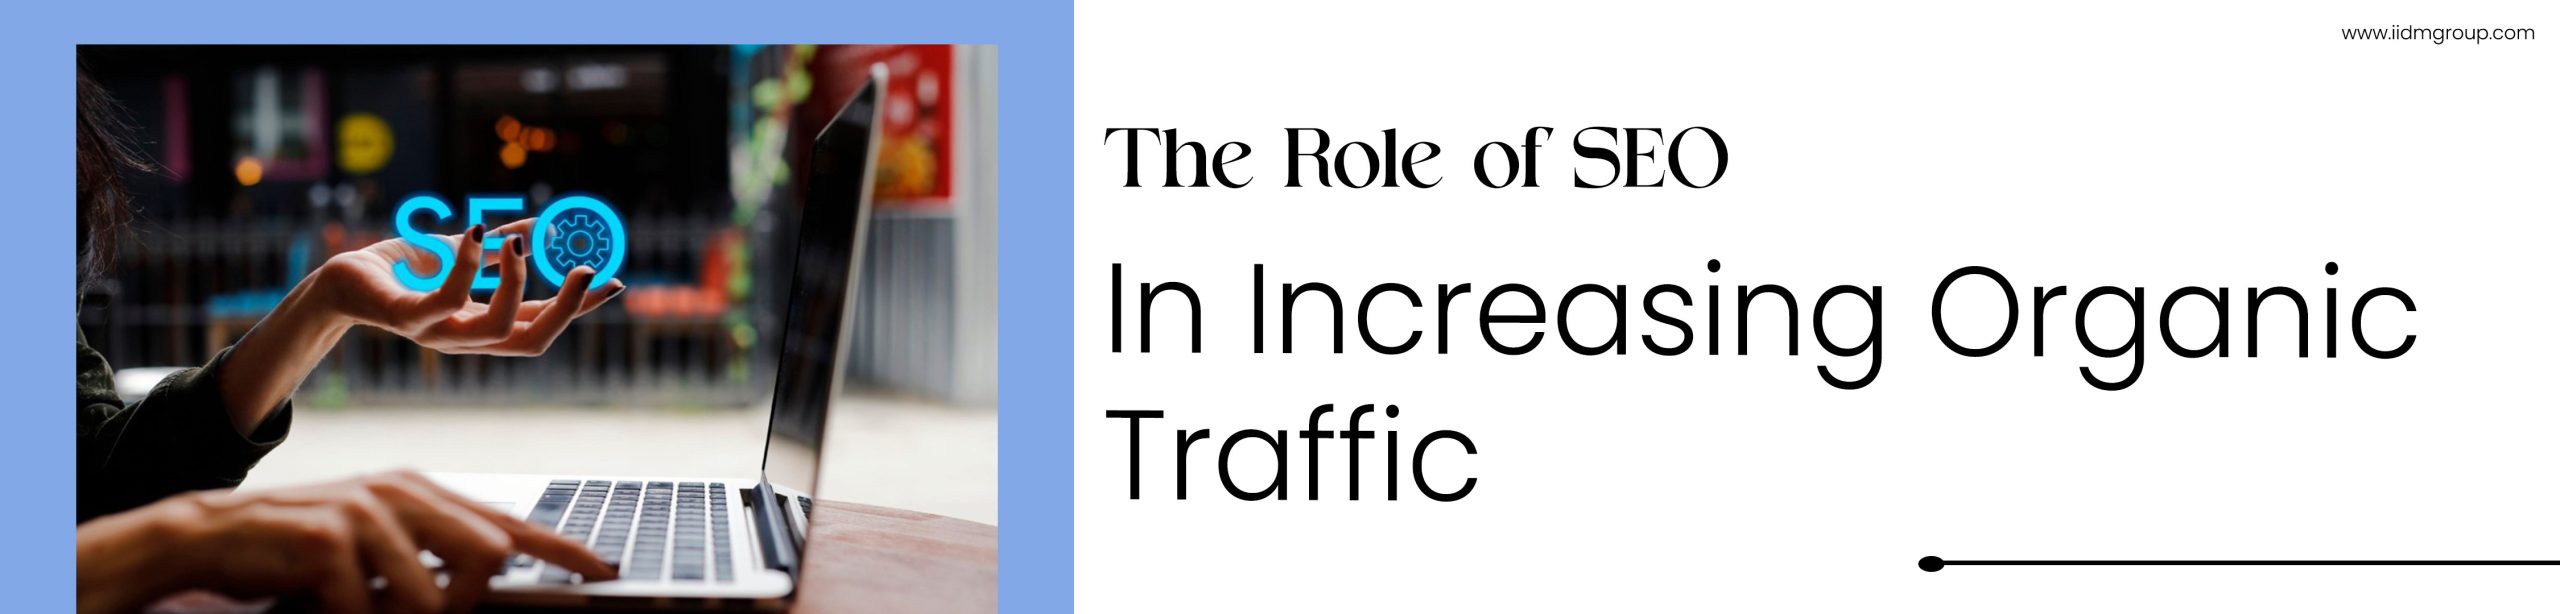 The role of seo in increasing traffic